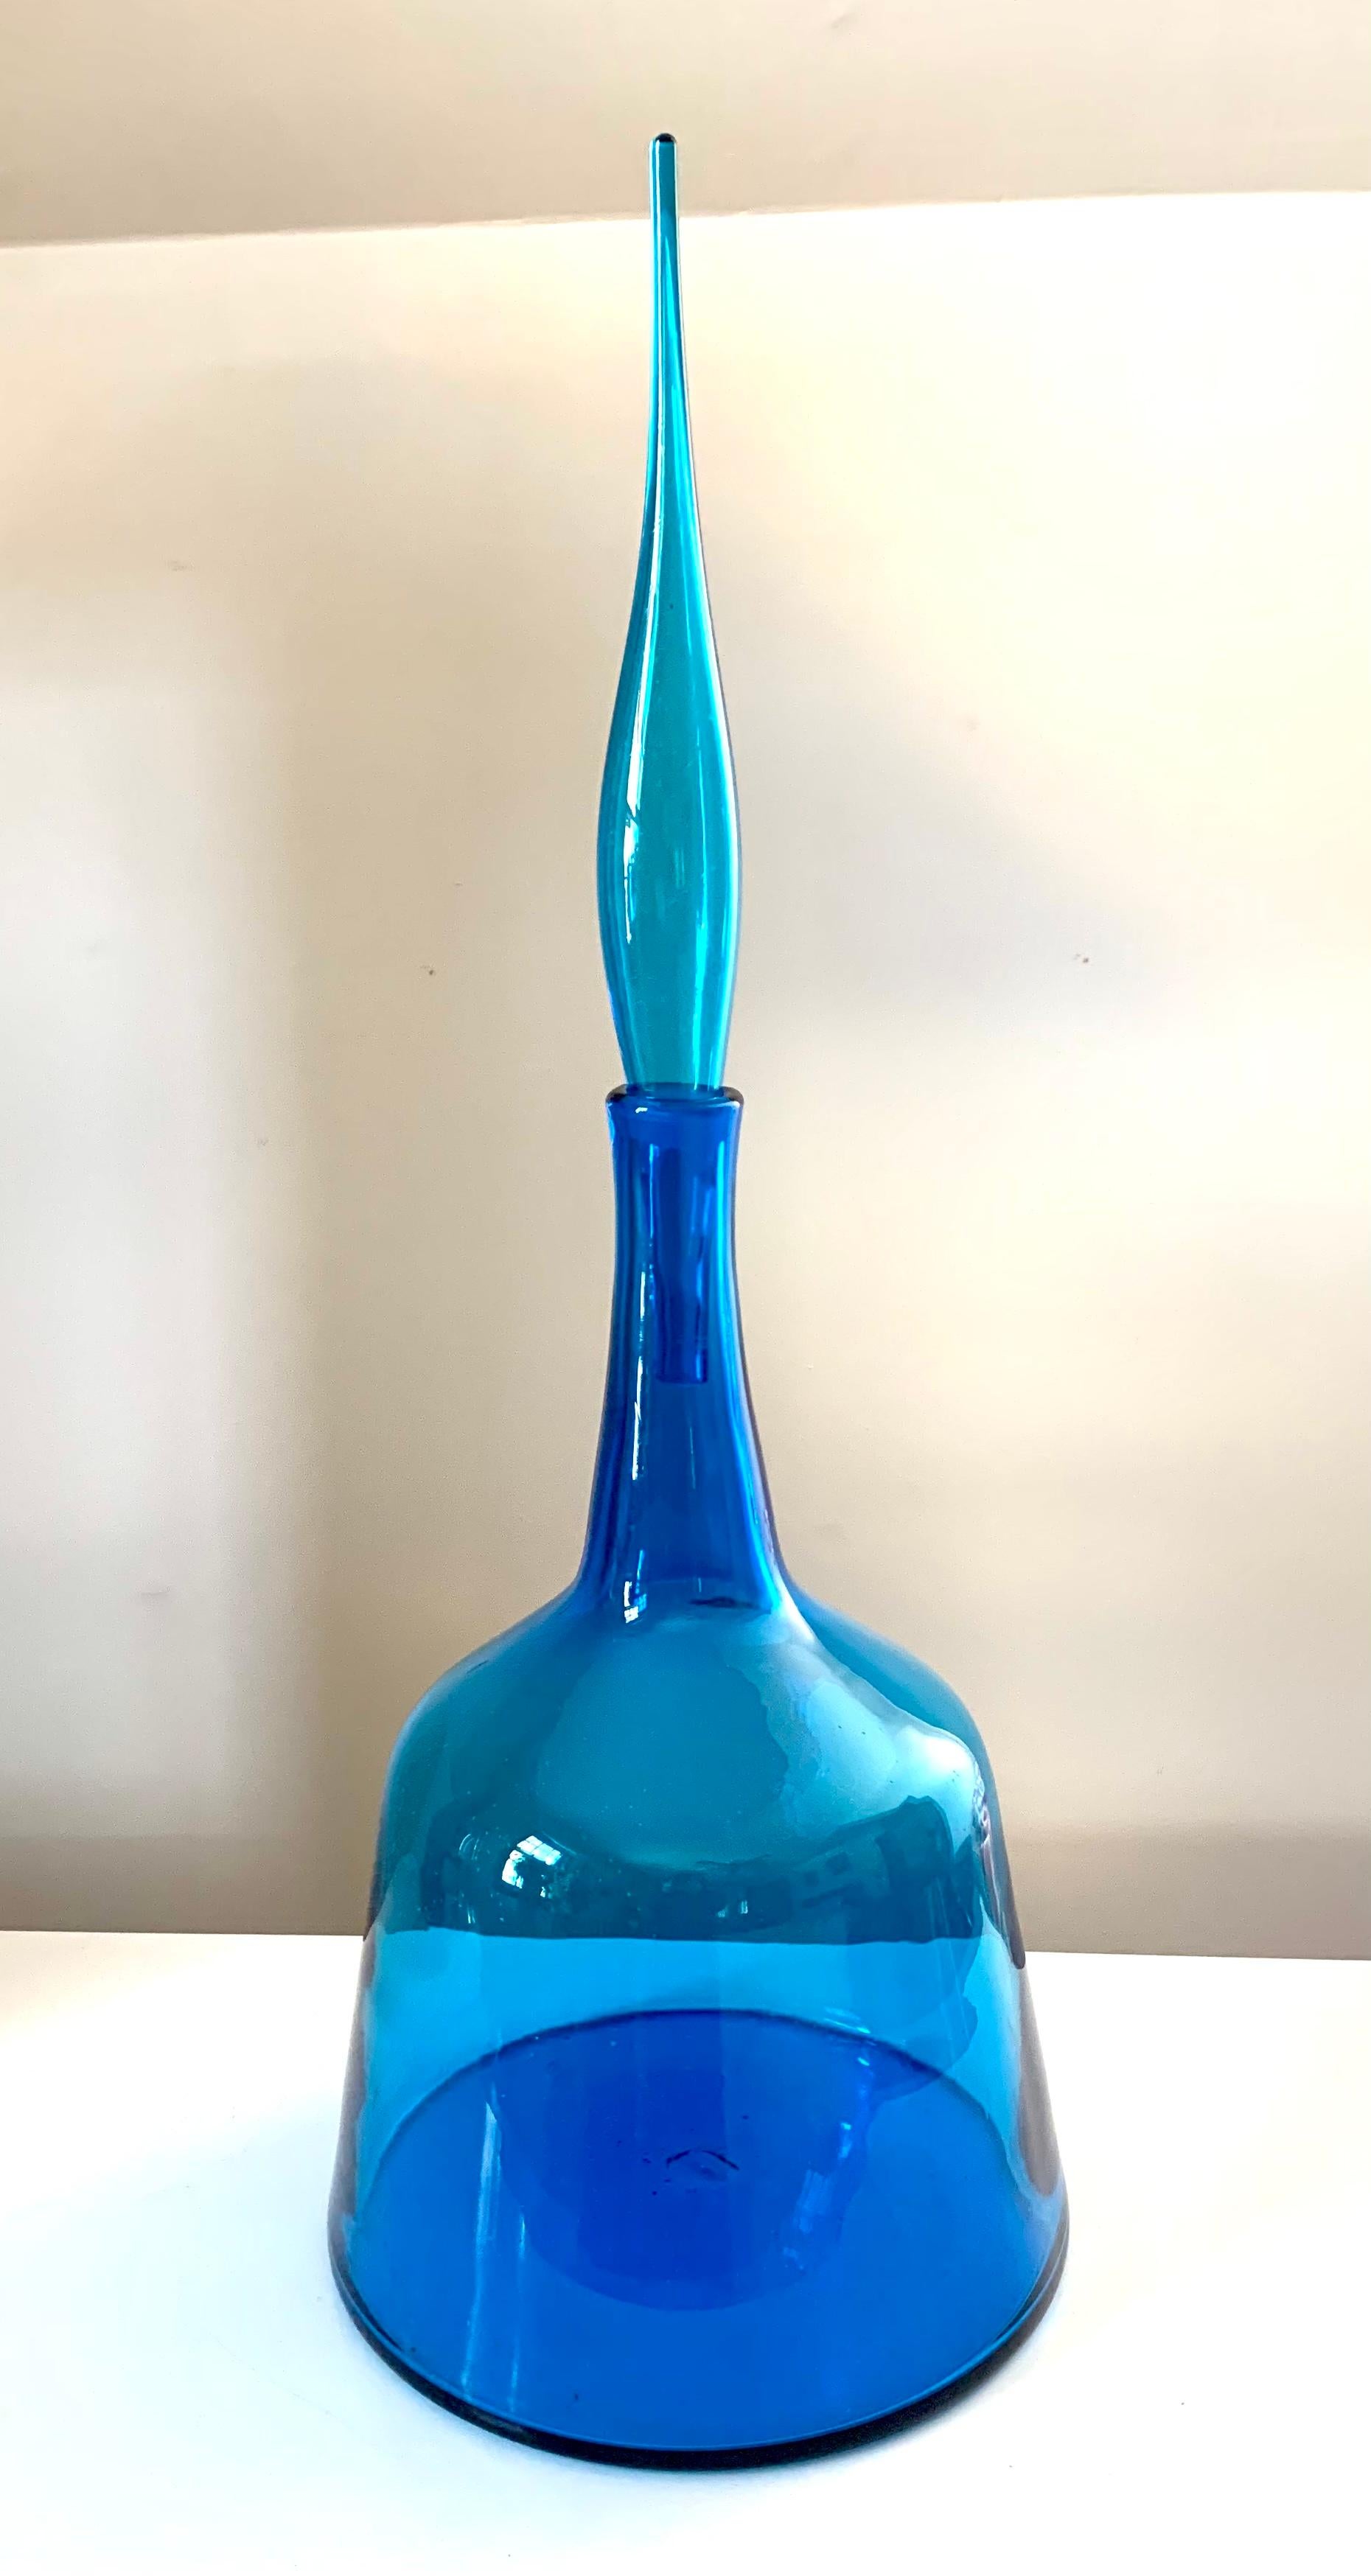 Mid Century Modern Wayne Husted for Blenko large turquoise flame stoppered floor decanter with original paper label intact.
#6122L
Excellent condition
Beautiful vibrant color, handblown, fluid elegant shape.